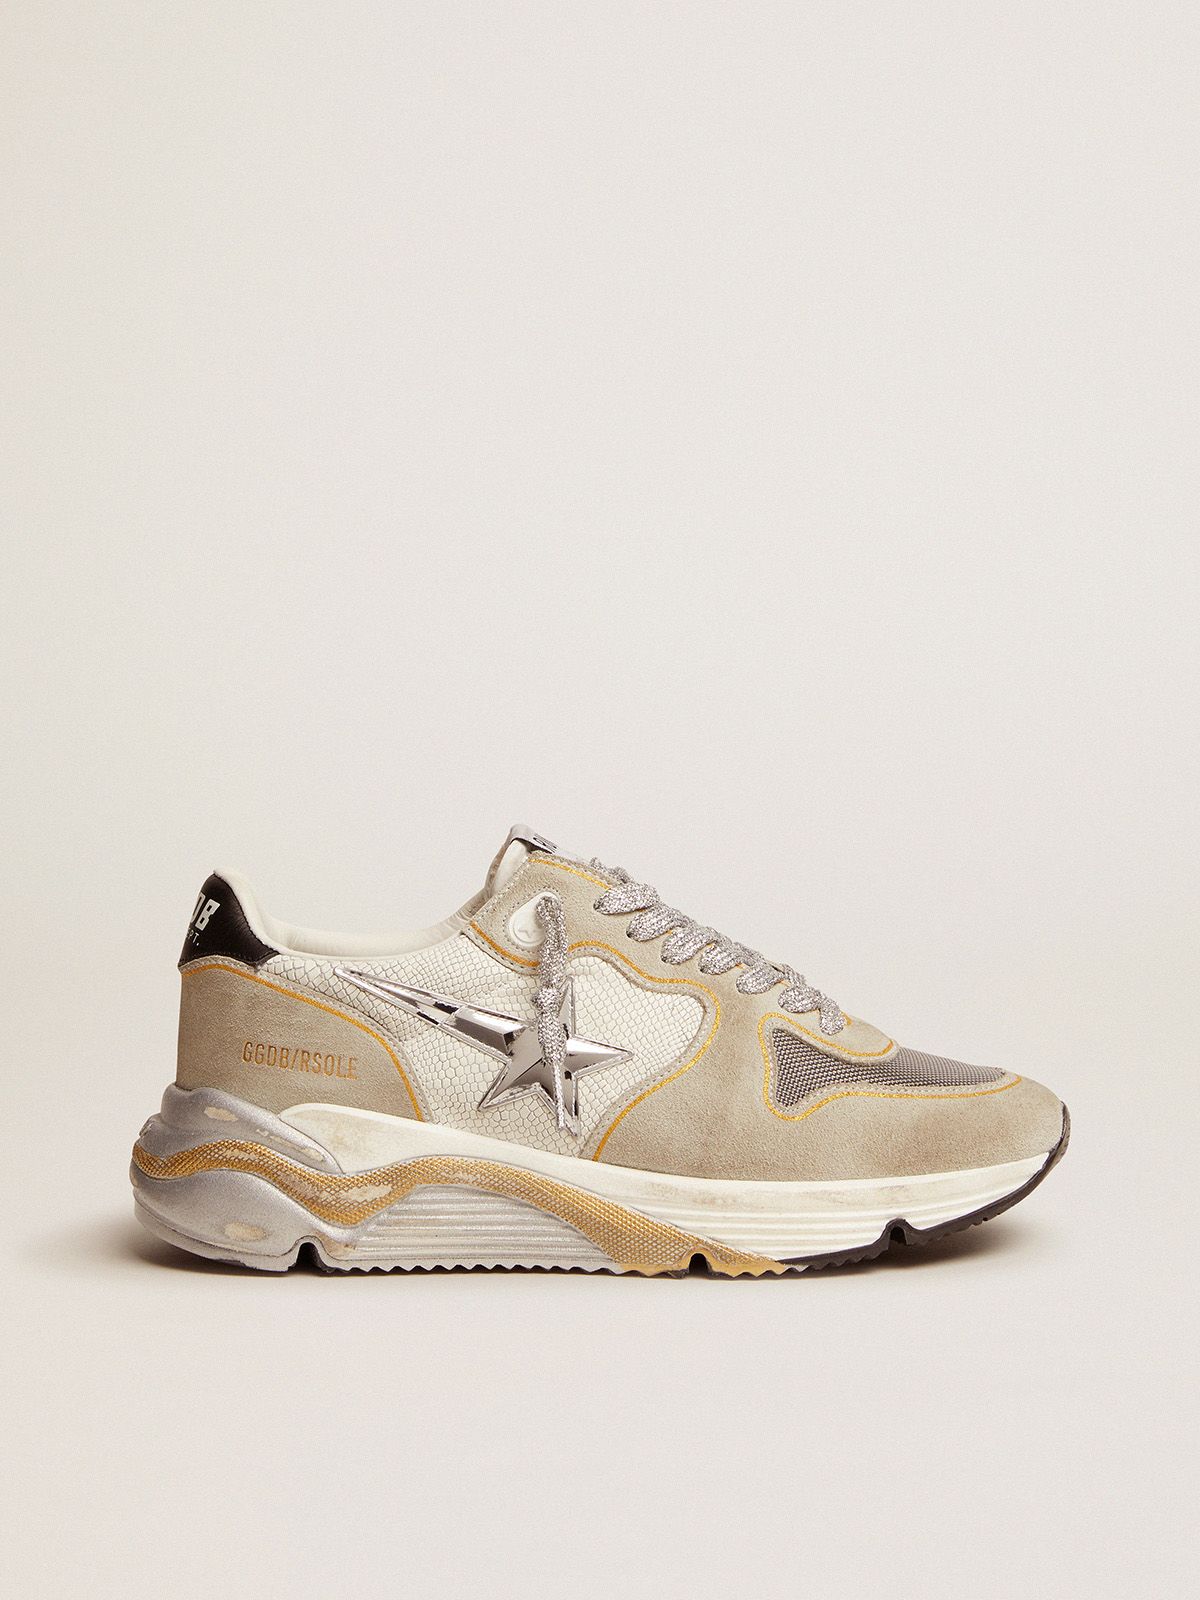 golden goose mesh in suede snake-print Sole Running insert with LTD sneakers leather white and